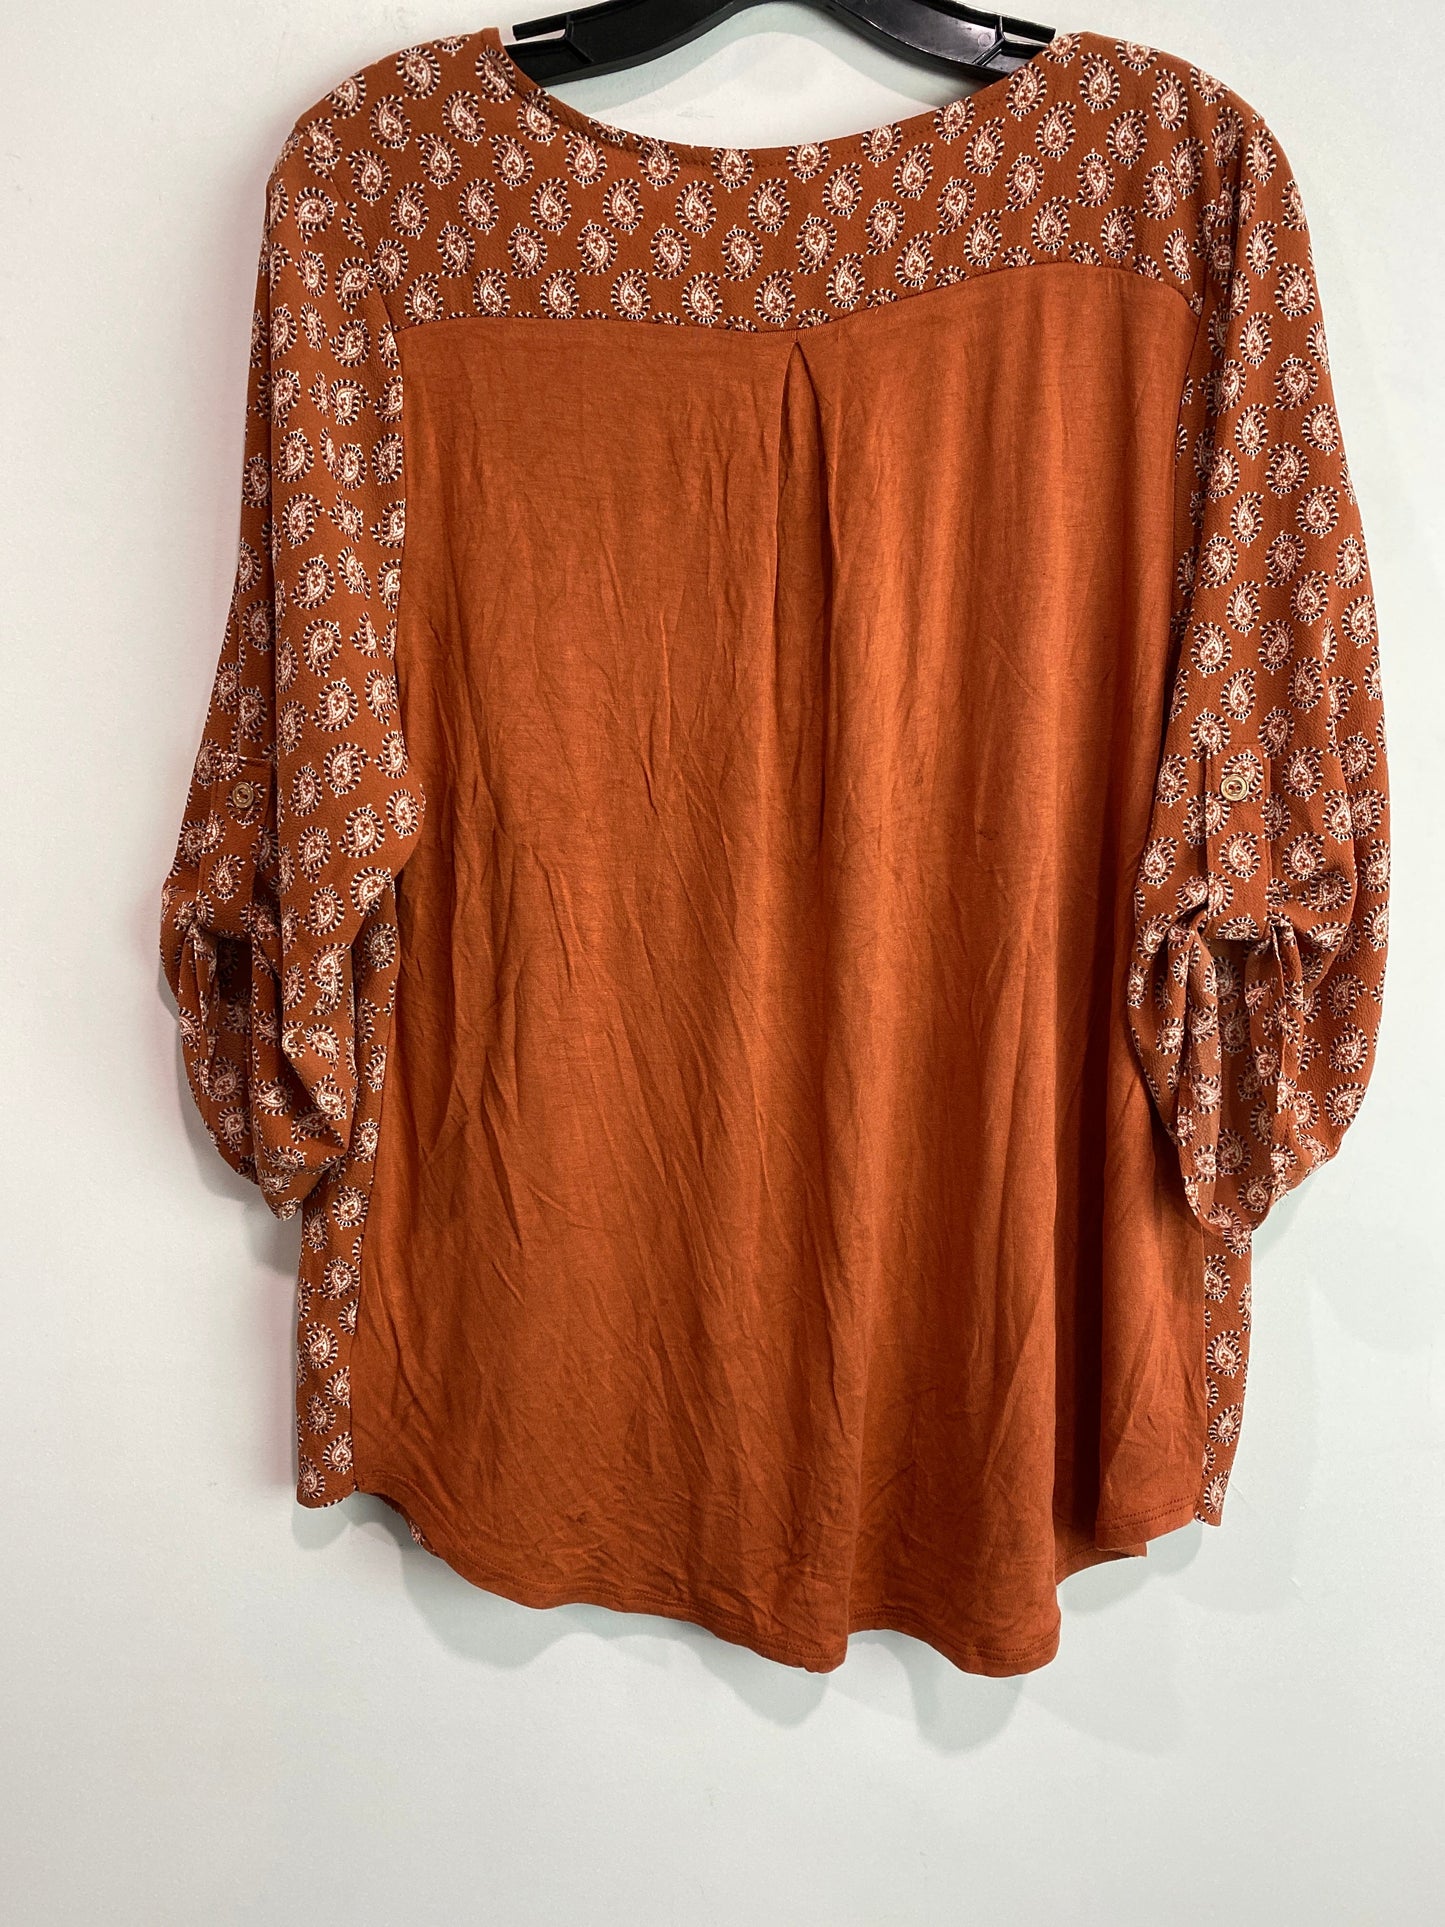 Brown Top 3/4 Sleeve Clothes Mentor, Size Xl